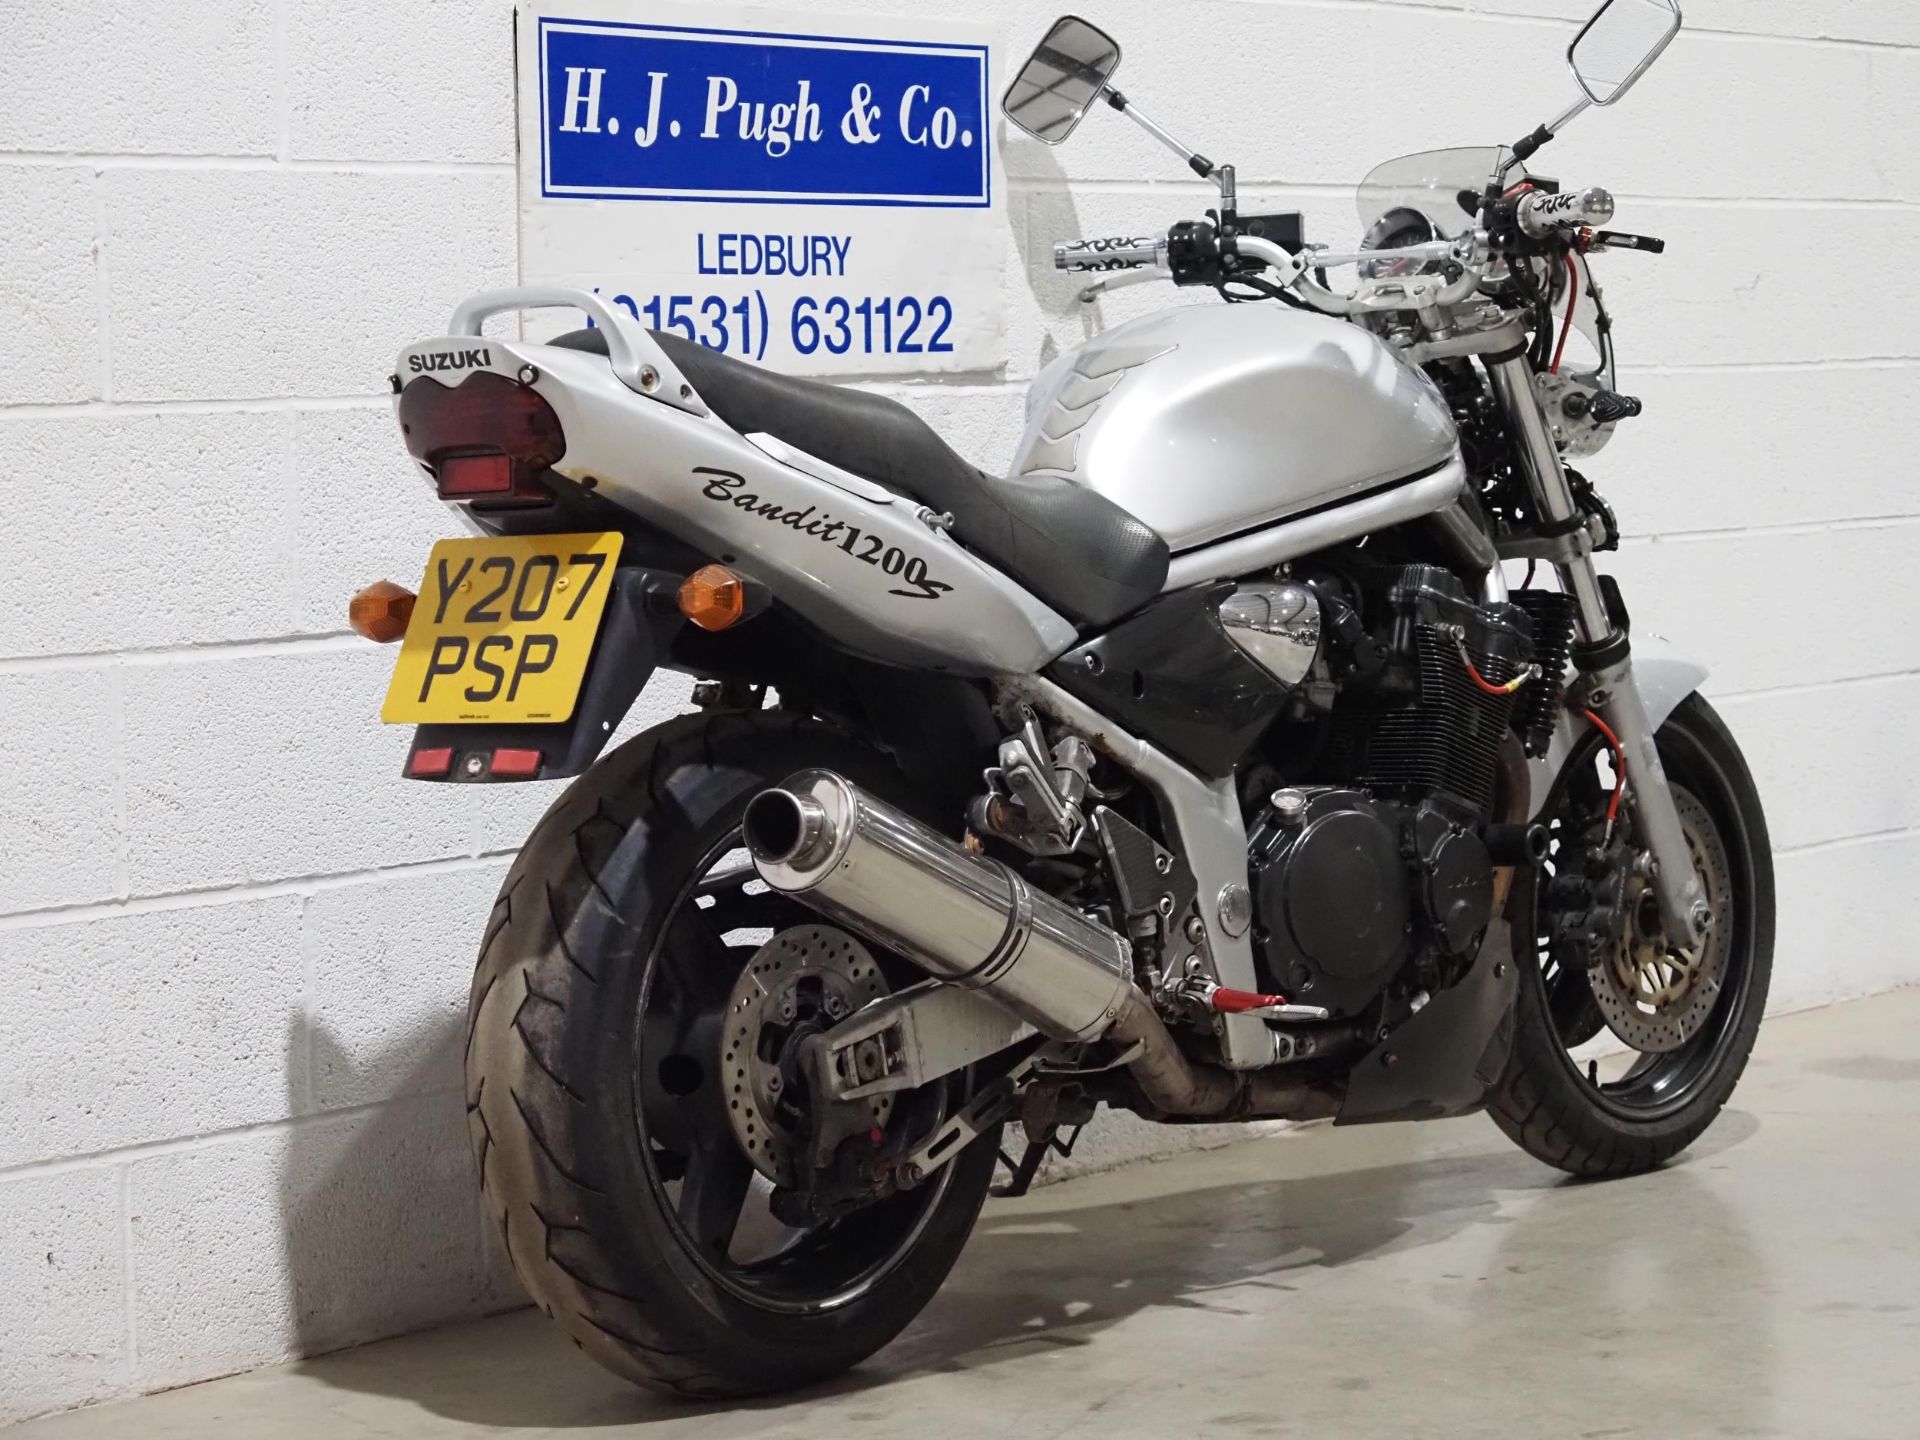 Suzuki GSF1200 Bandit motorcycle. 2001. 1197cc. Runs and rides. MOT until 19.03.25. Comes with - Image 3 of 6